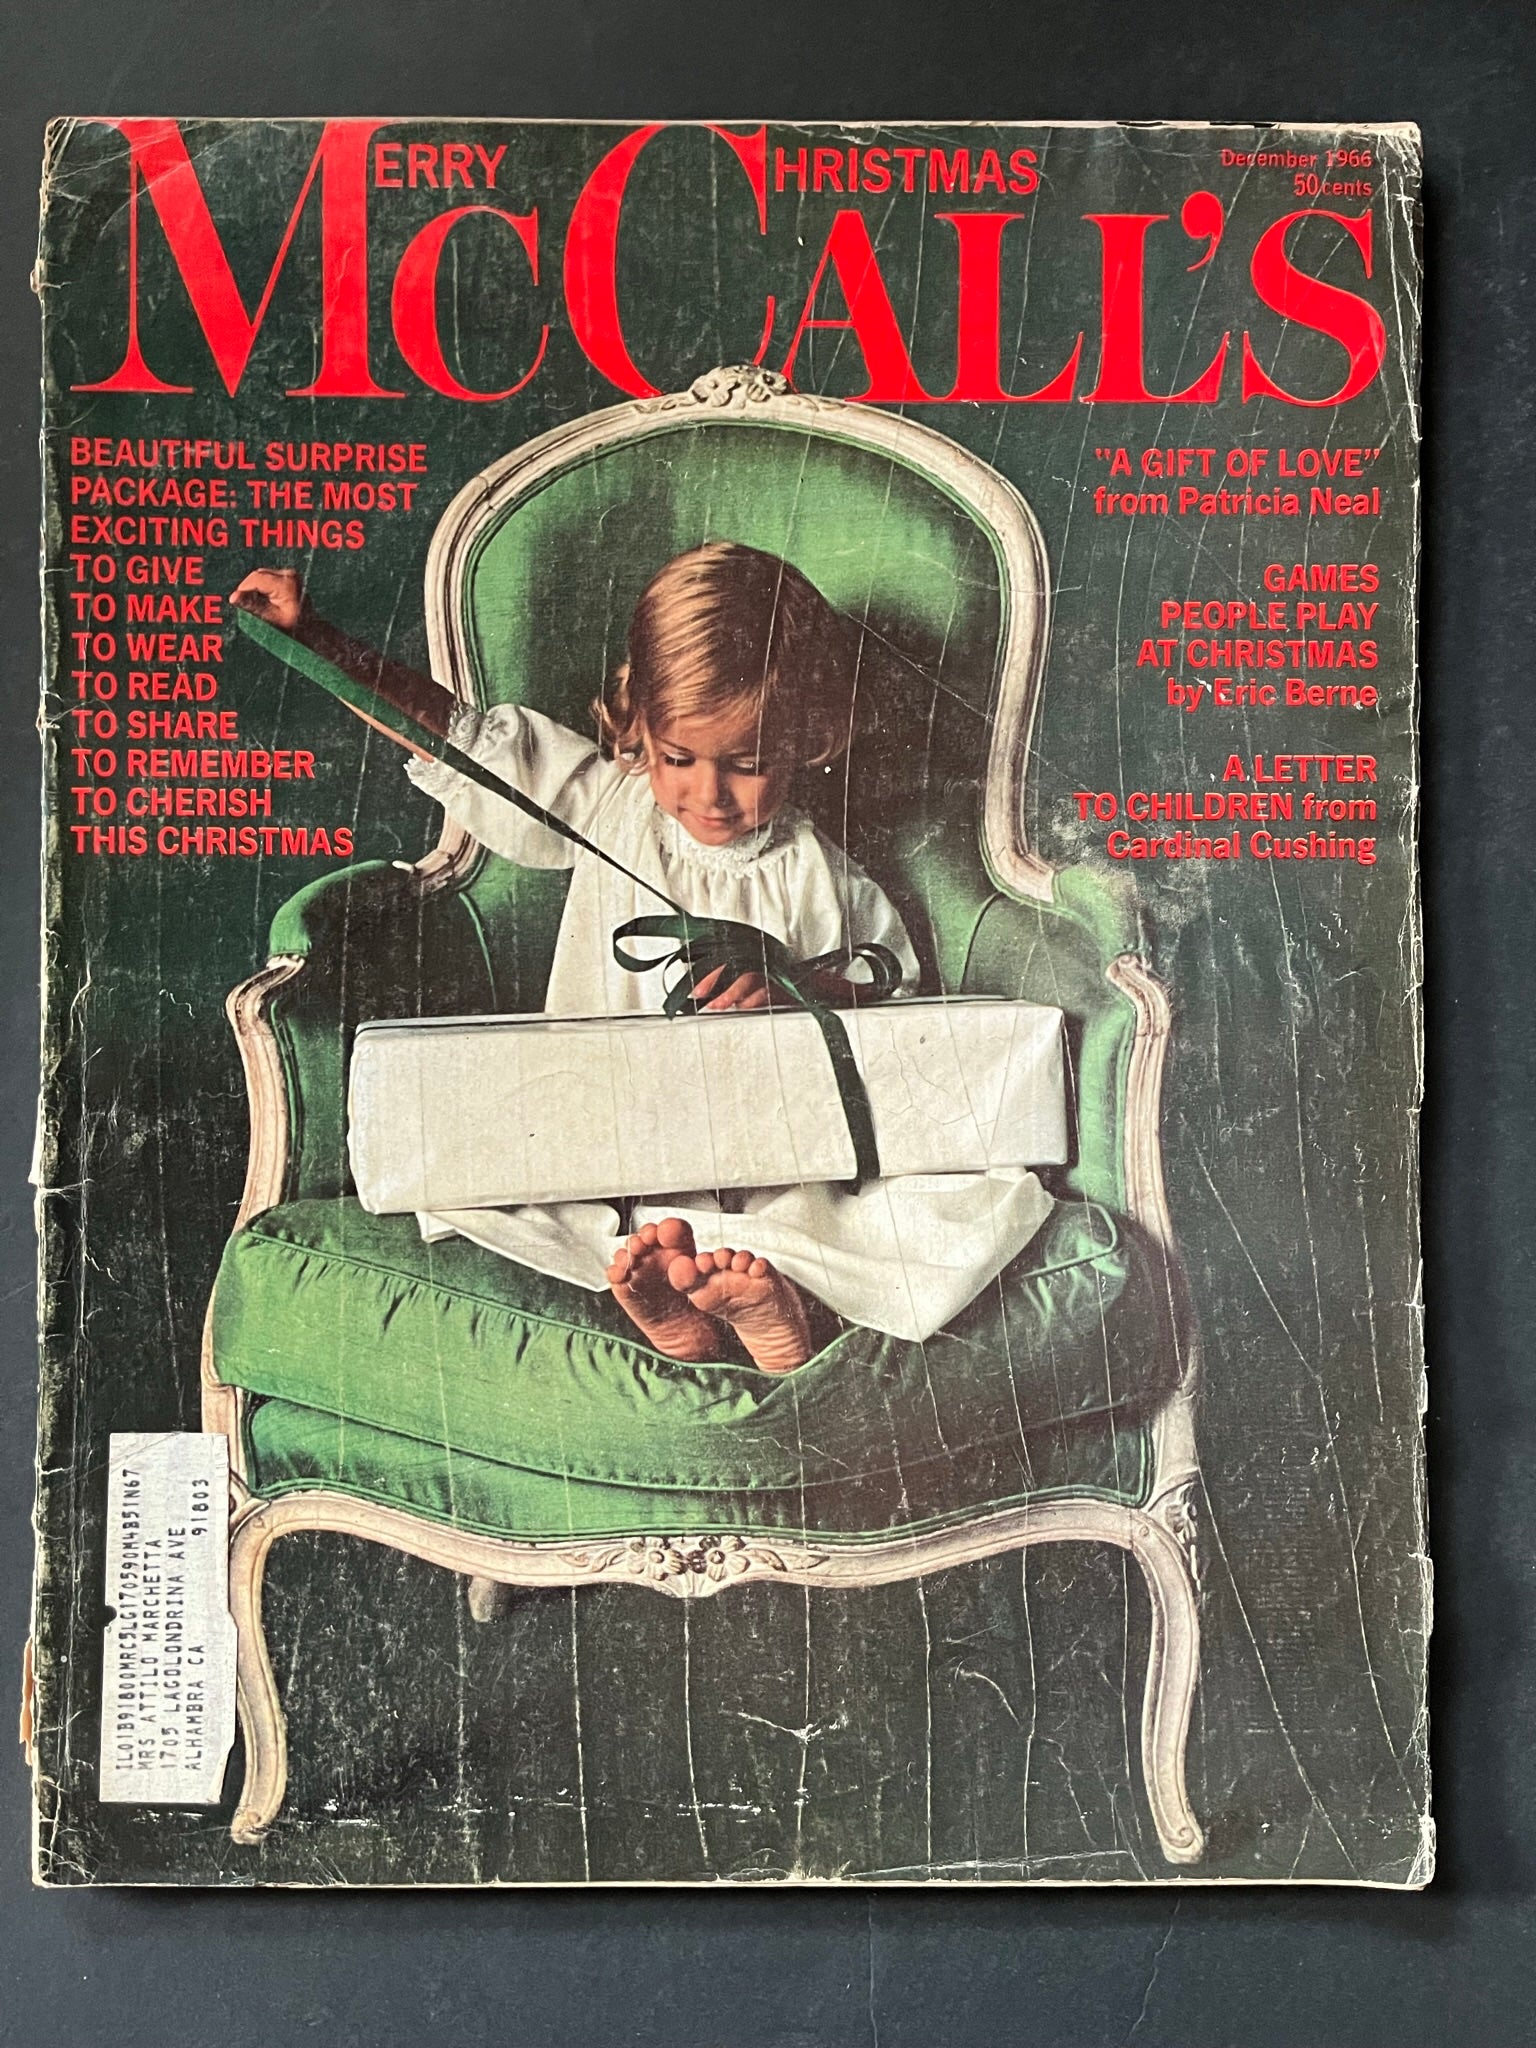 McCall's Magazine December 1966 - Merry Christmas Issue with Heartwarming Cover-CropsyPix